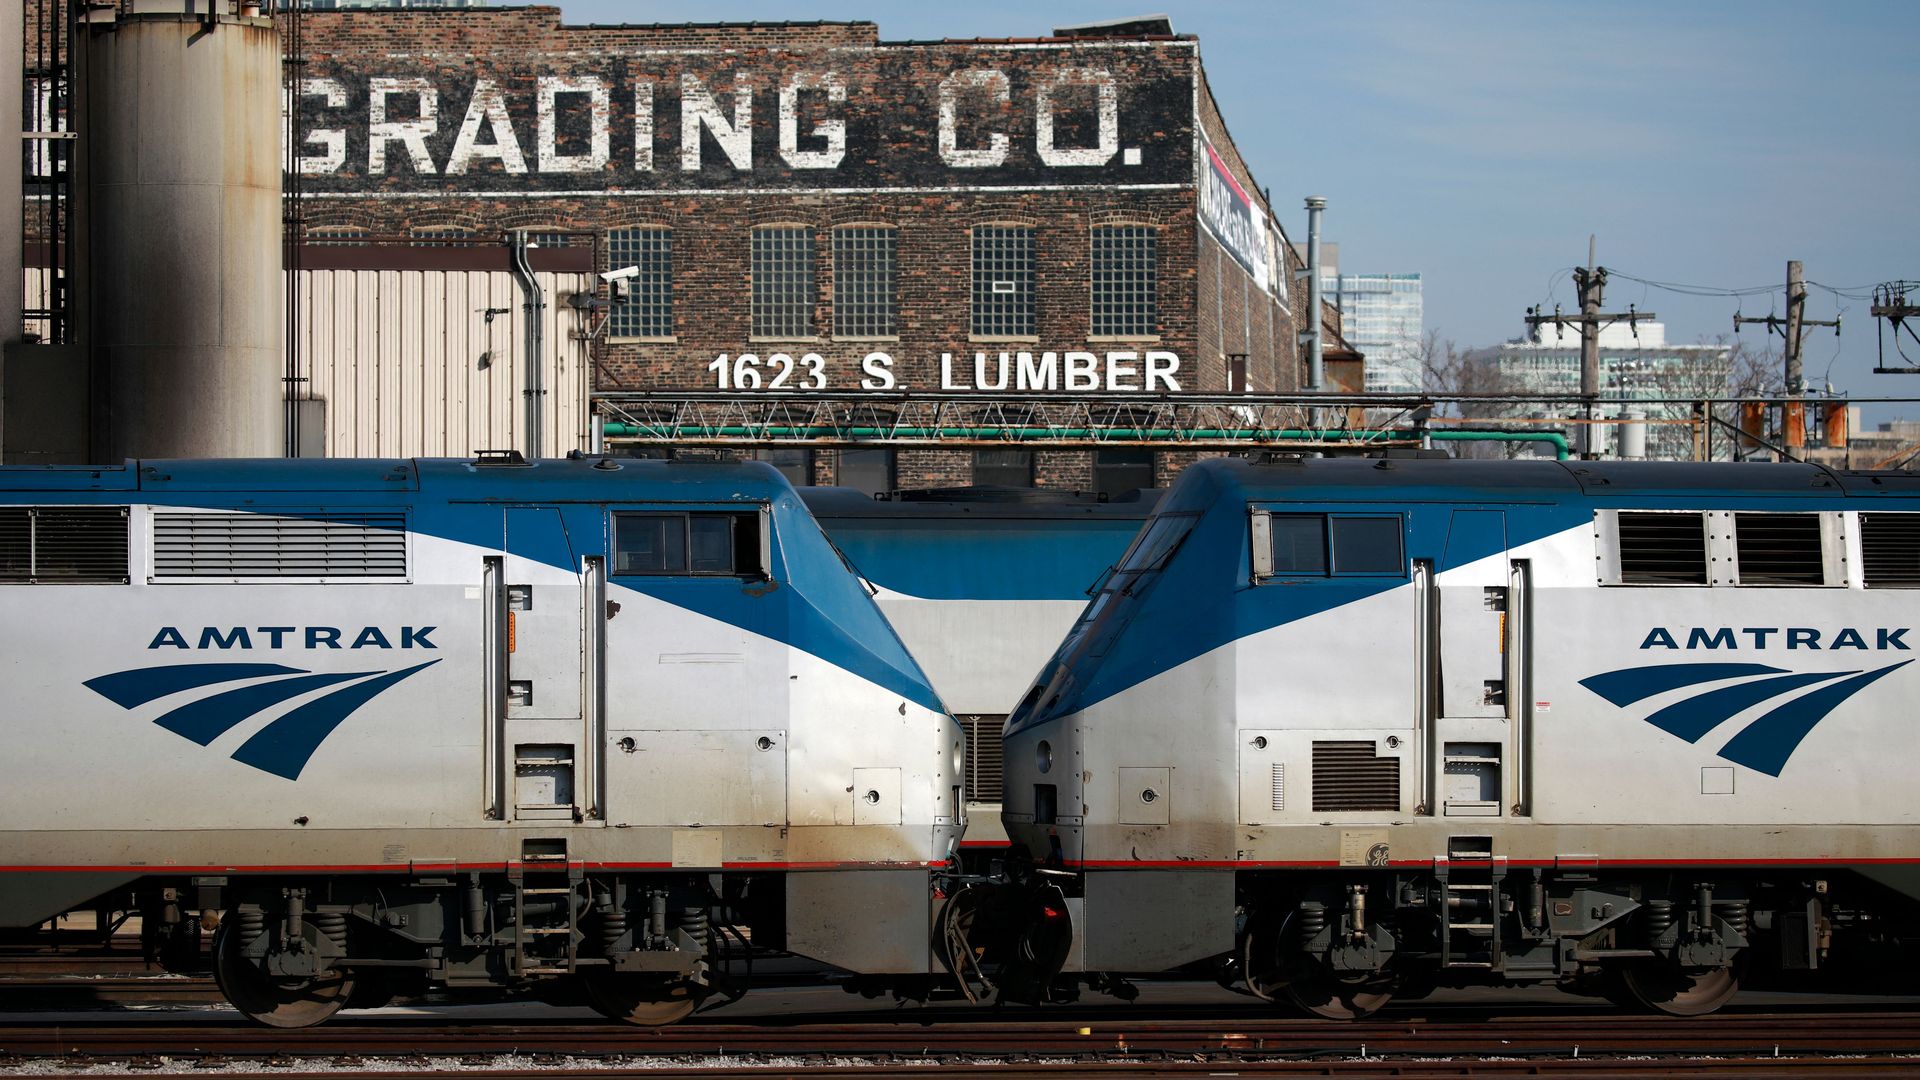 Amtrak passenger railroad locomotives sit parked in a rail yard at Chicago Union Station in Chicago, Illinois, on March 2, 2022